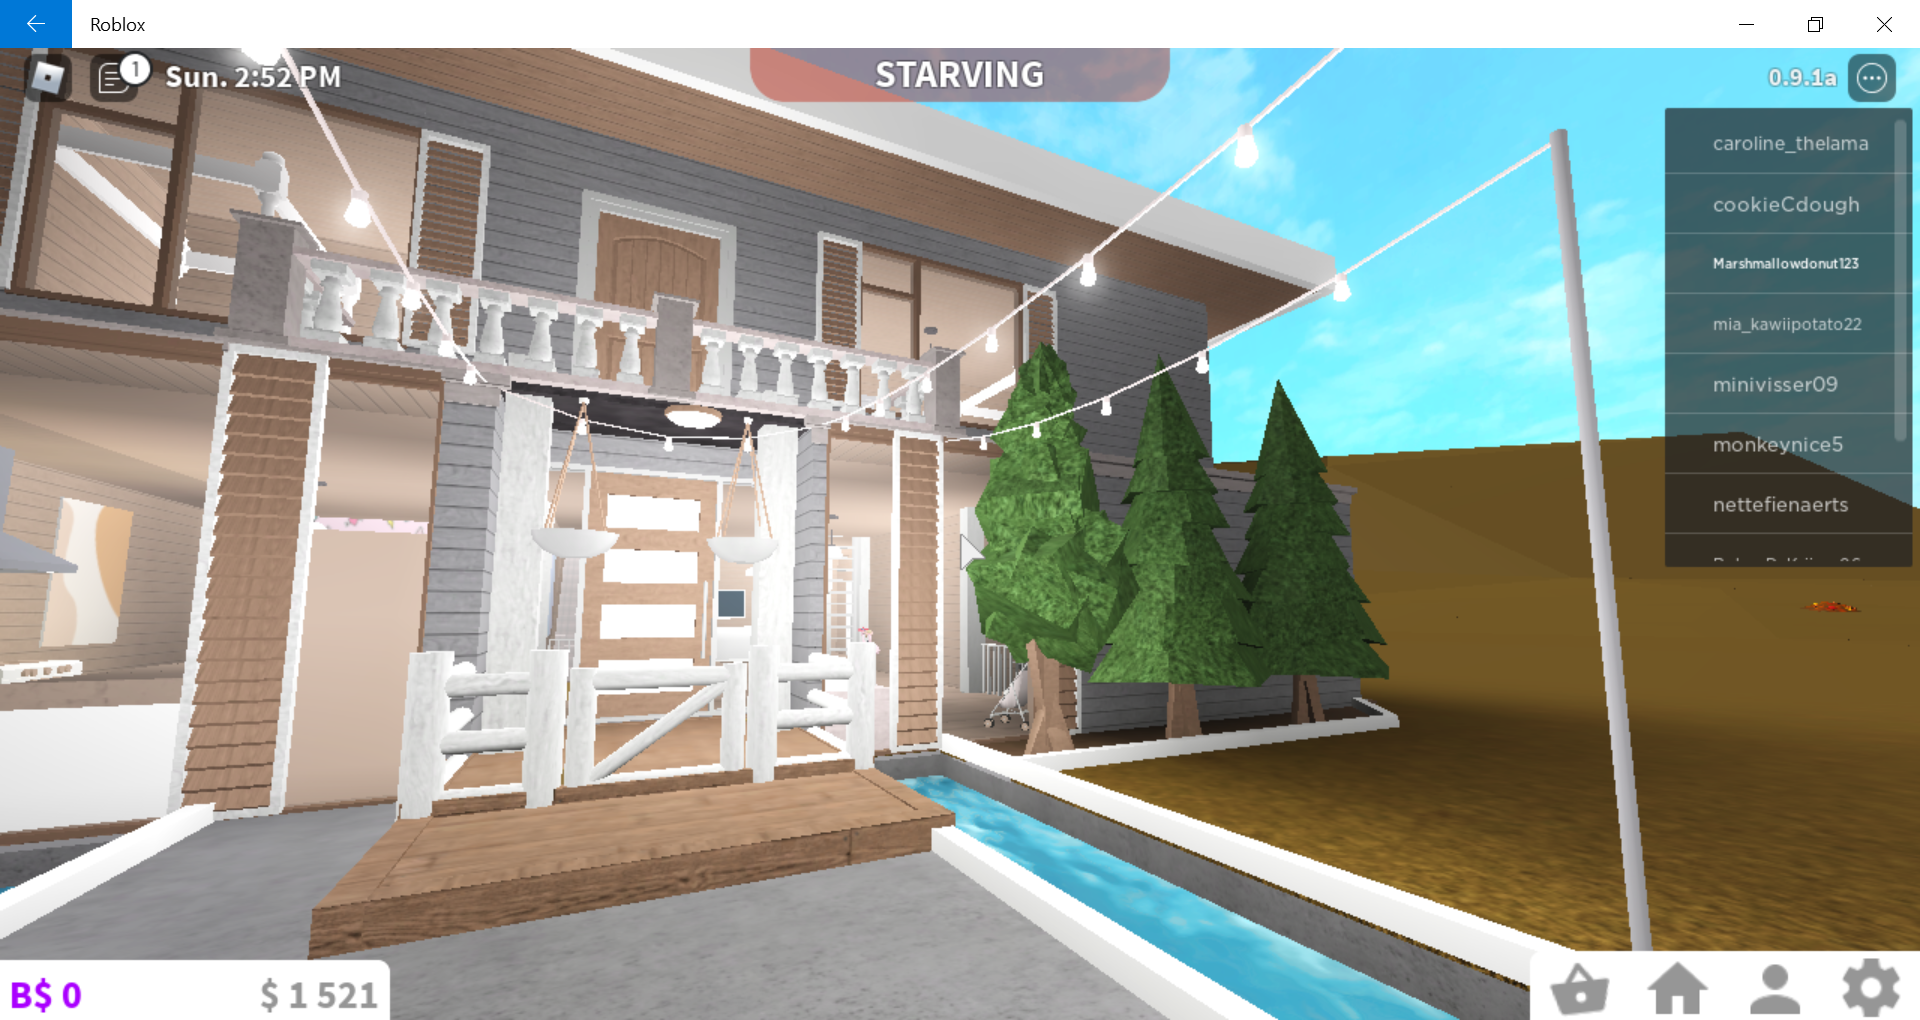 Trr2fmumnnqy8m - roblox beach house roleplay lets go